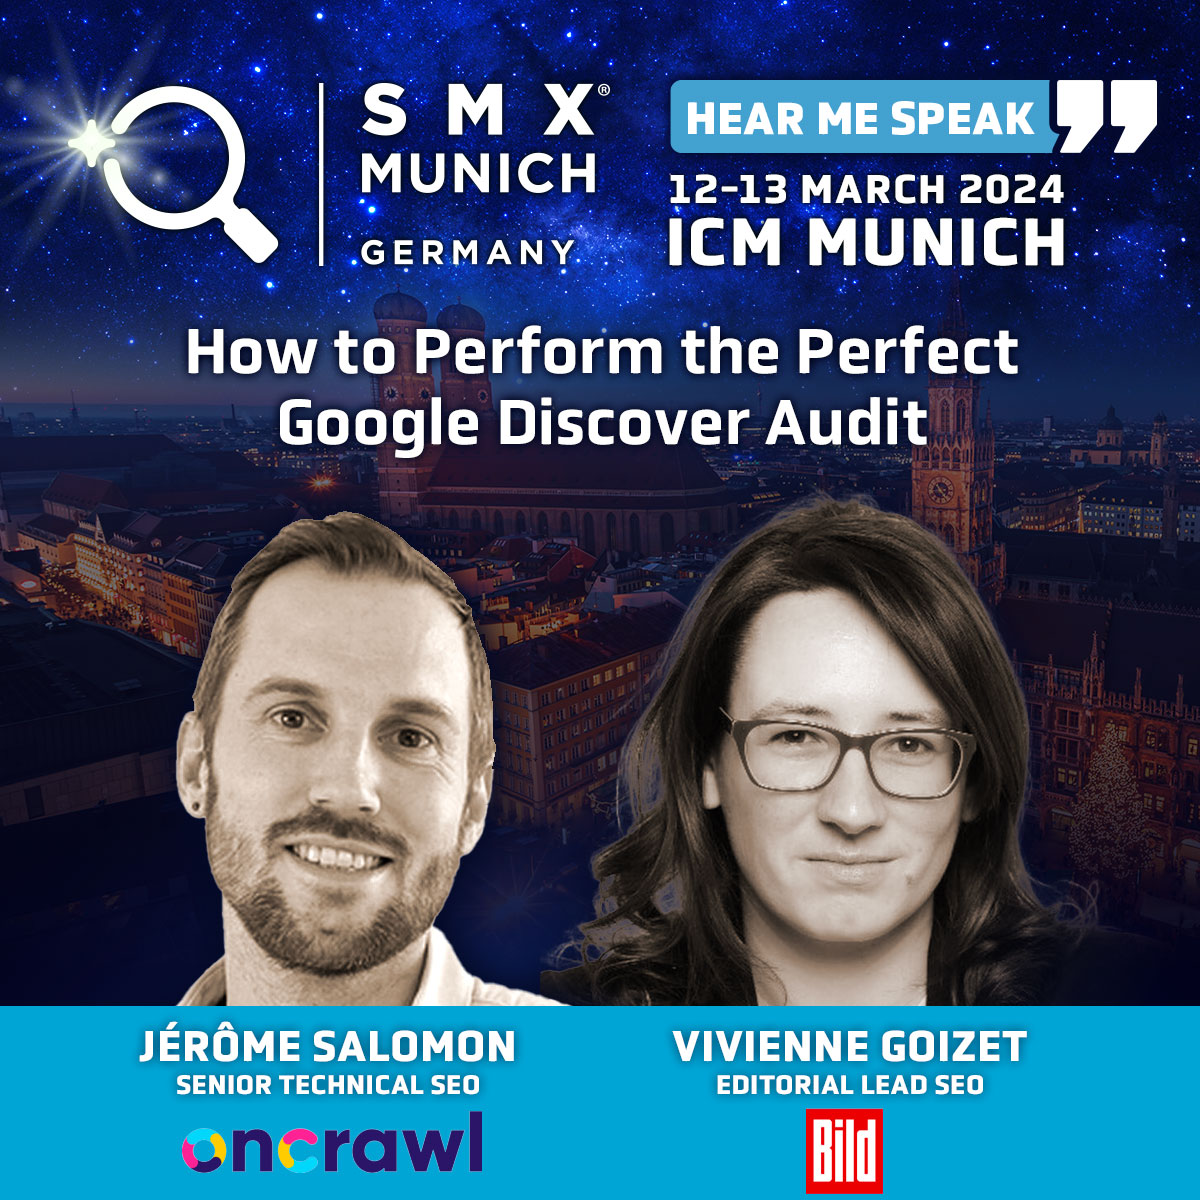 Discover practical, data-driven strategies for optimizing your website for Google Discover with Vivienne and Jérôme. ow.ly/5tB450QIEAG #smx #google #googlediscover #seo